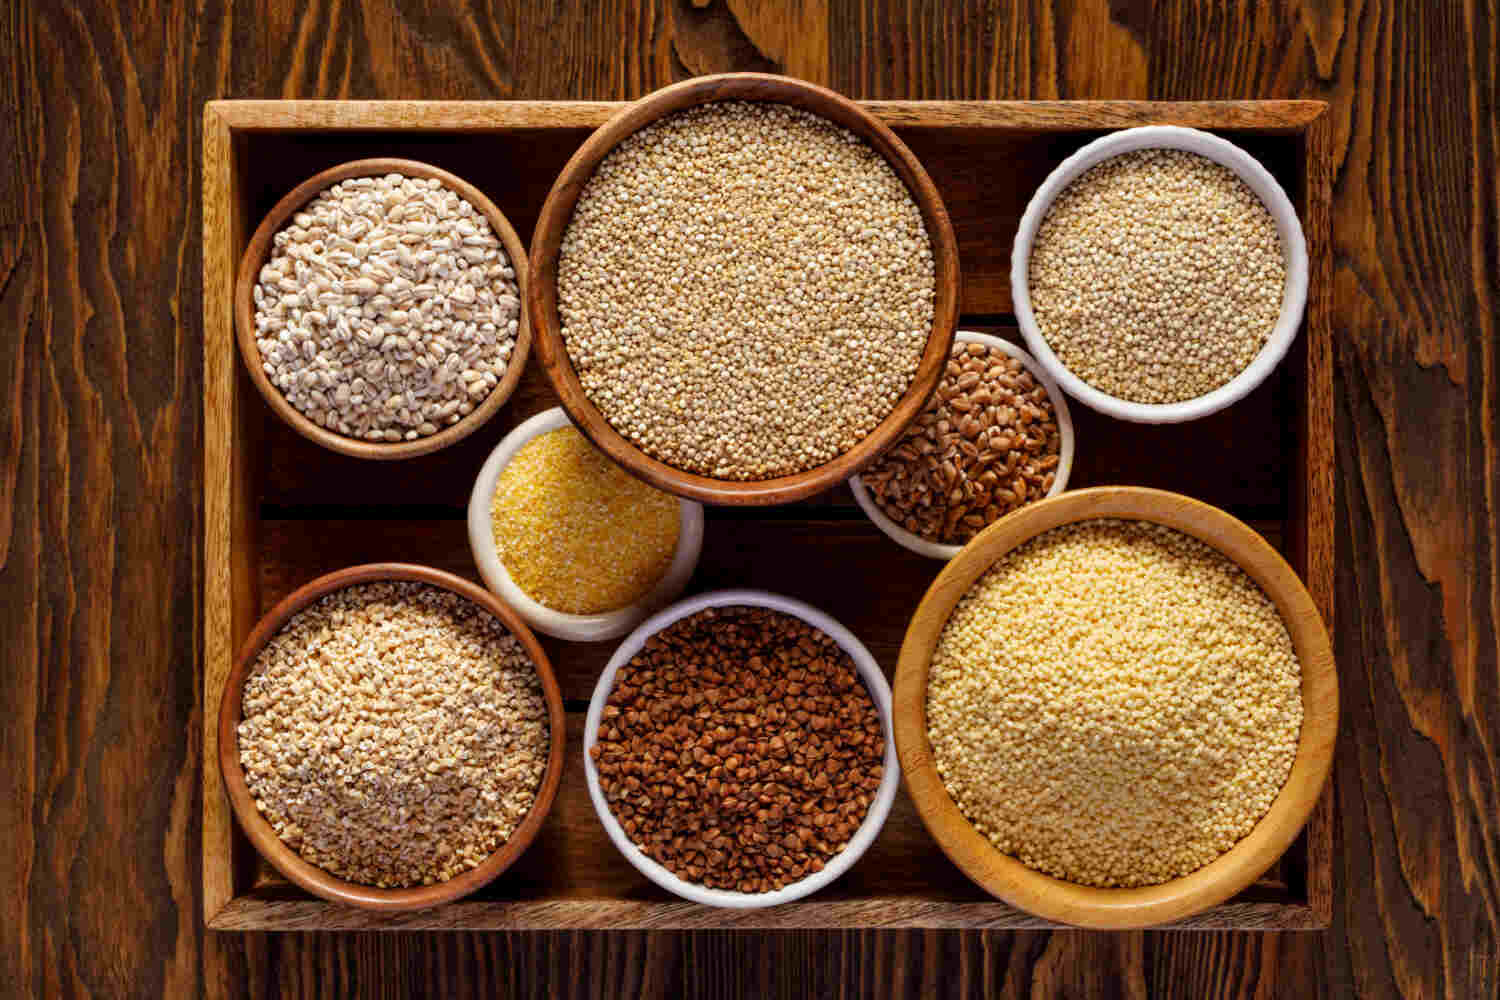 Nutritional profile of millets